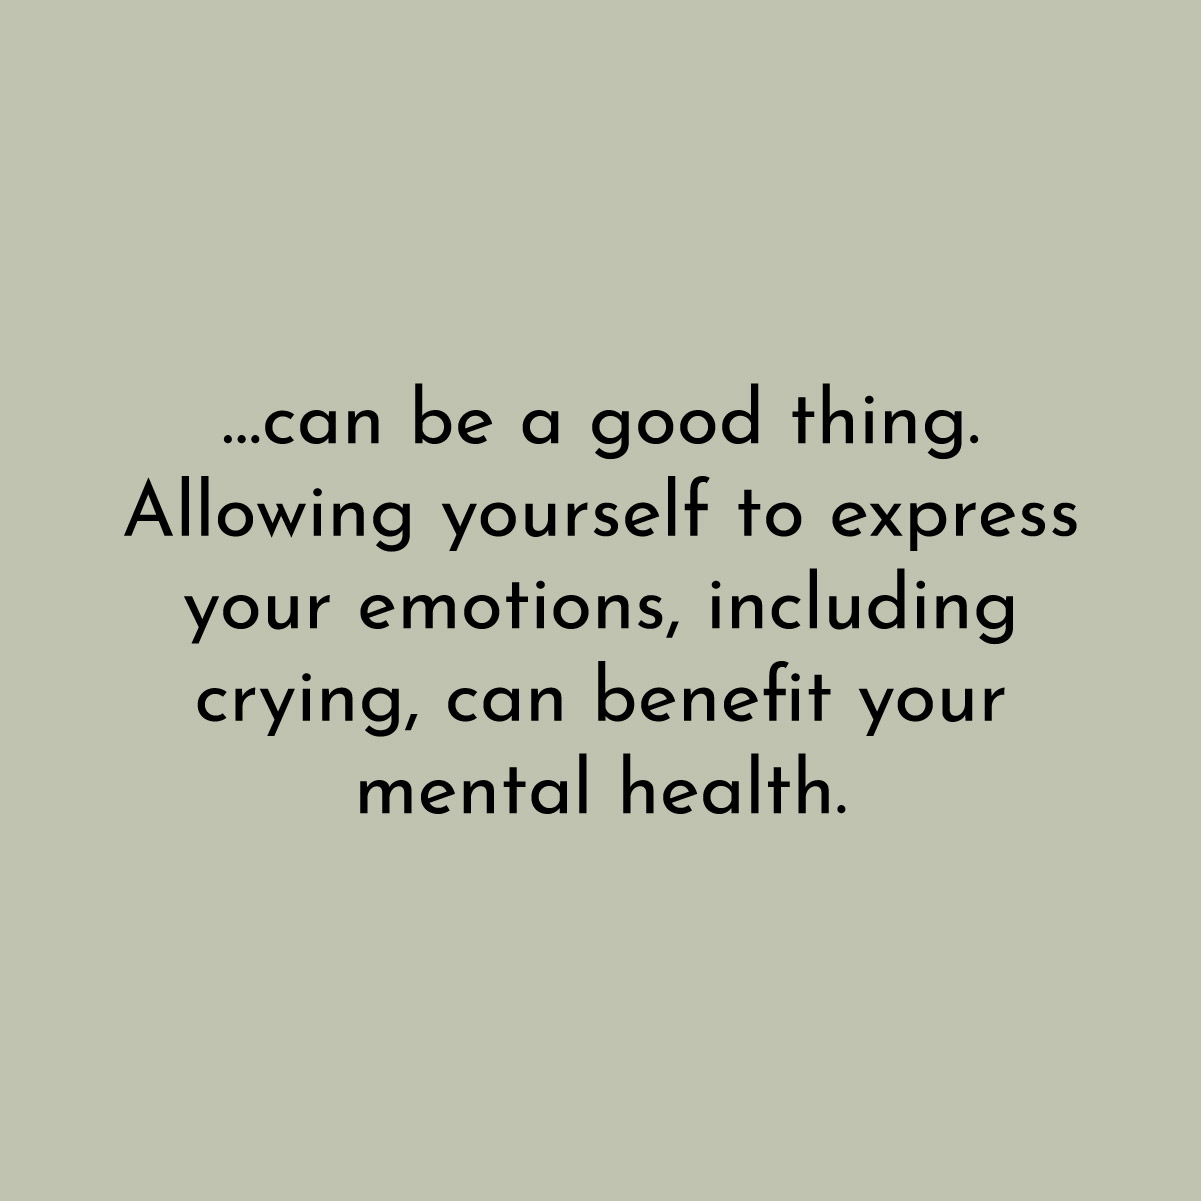 ...can be a good thing. Allowing yourself to express your emotions, including crying, can benefit your mental health